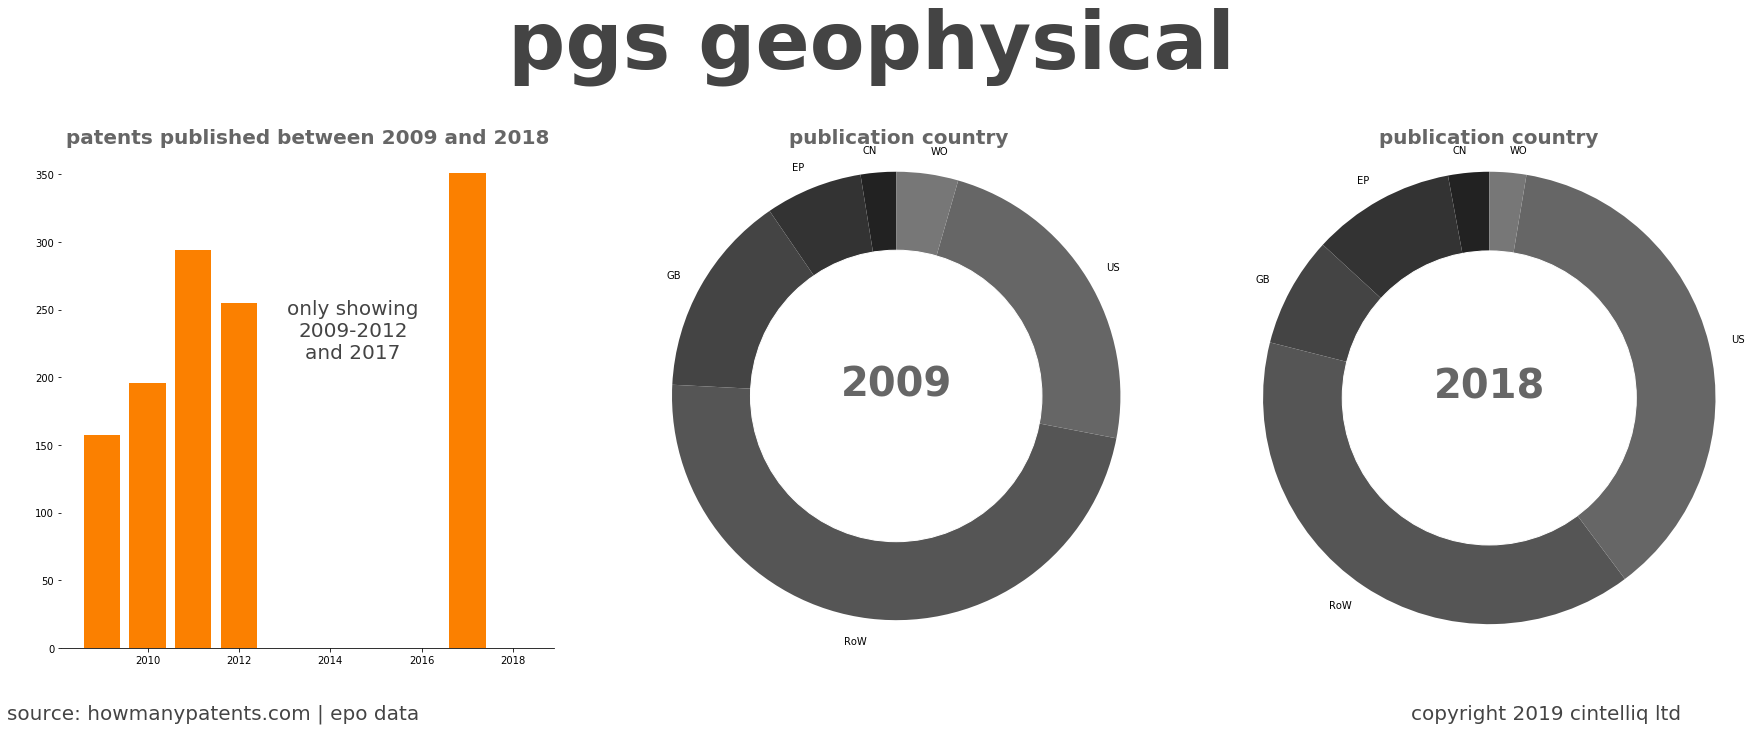 summary of patents for Pgs Geophysical